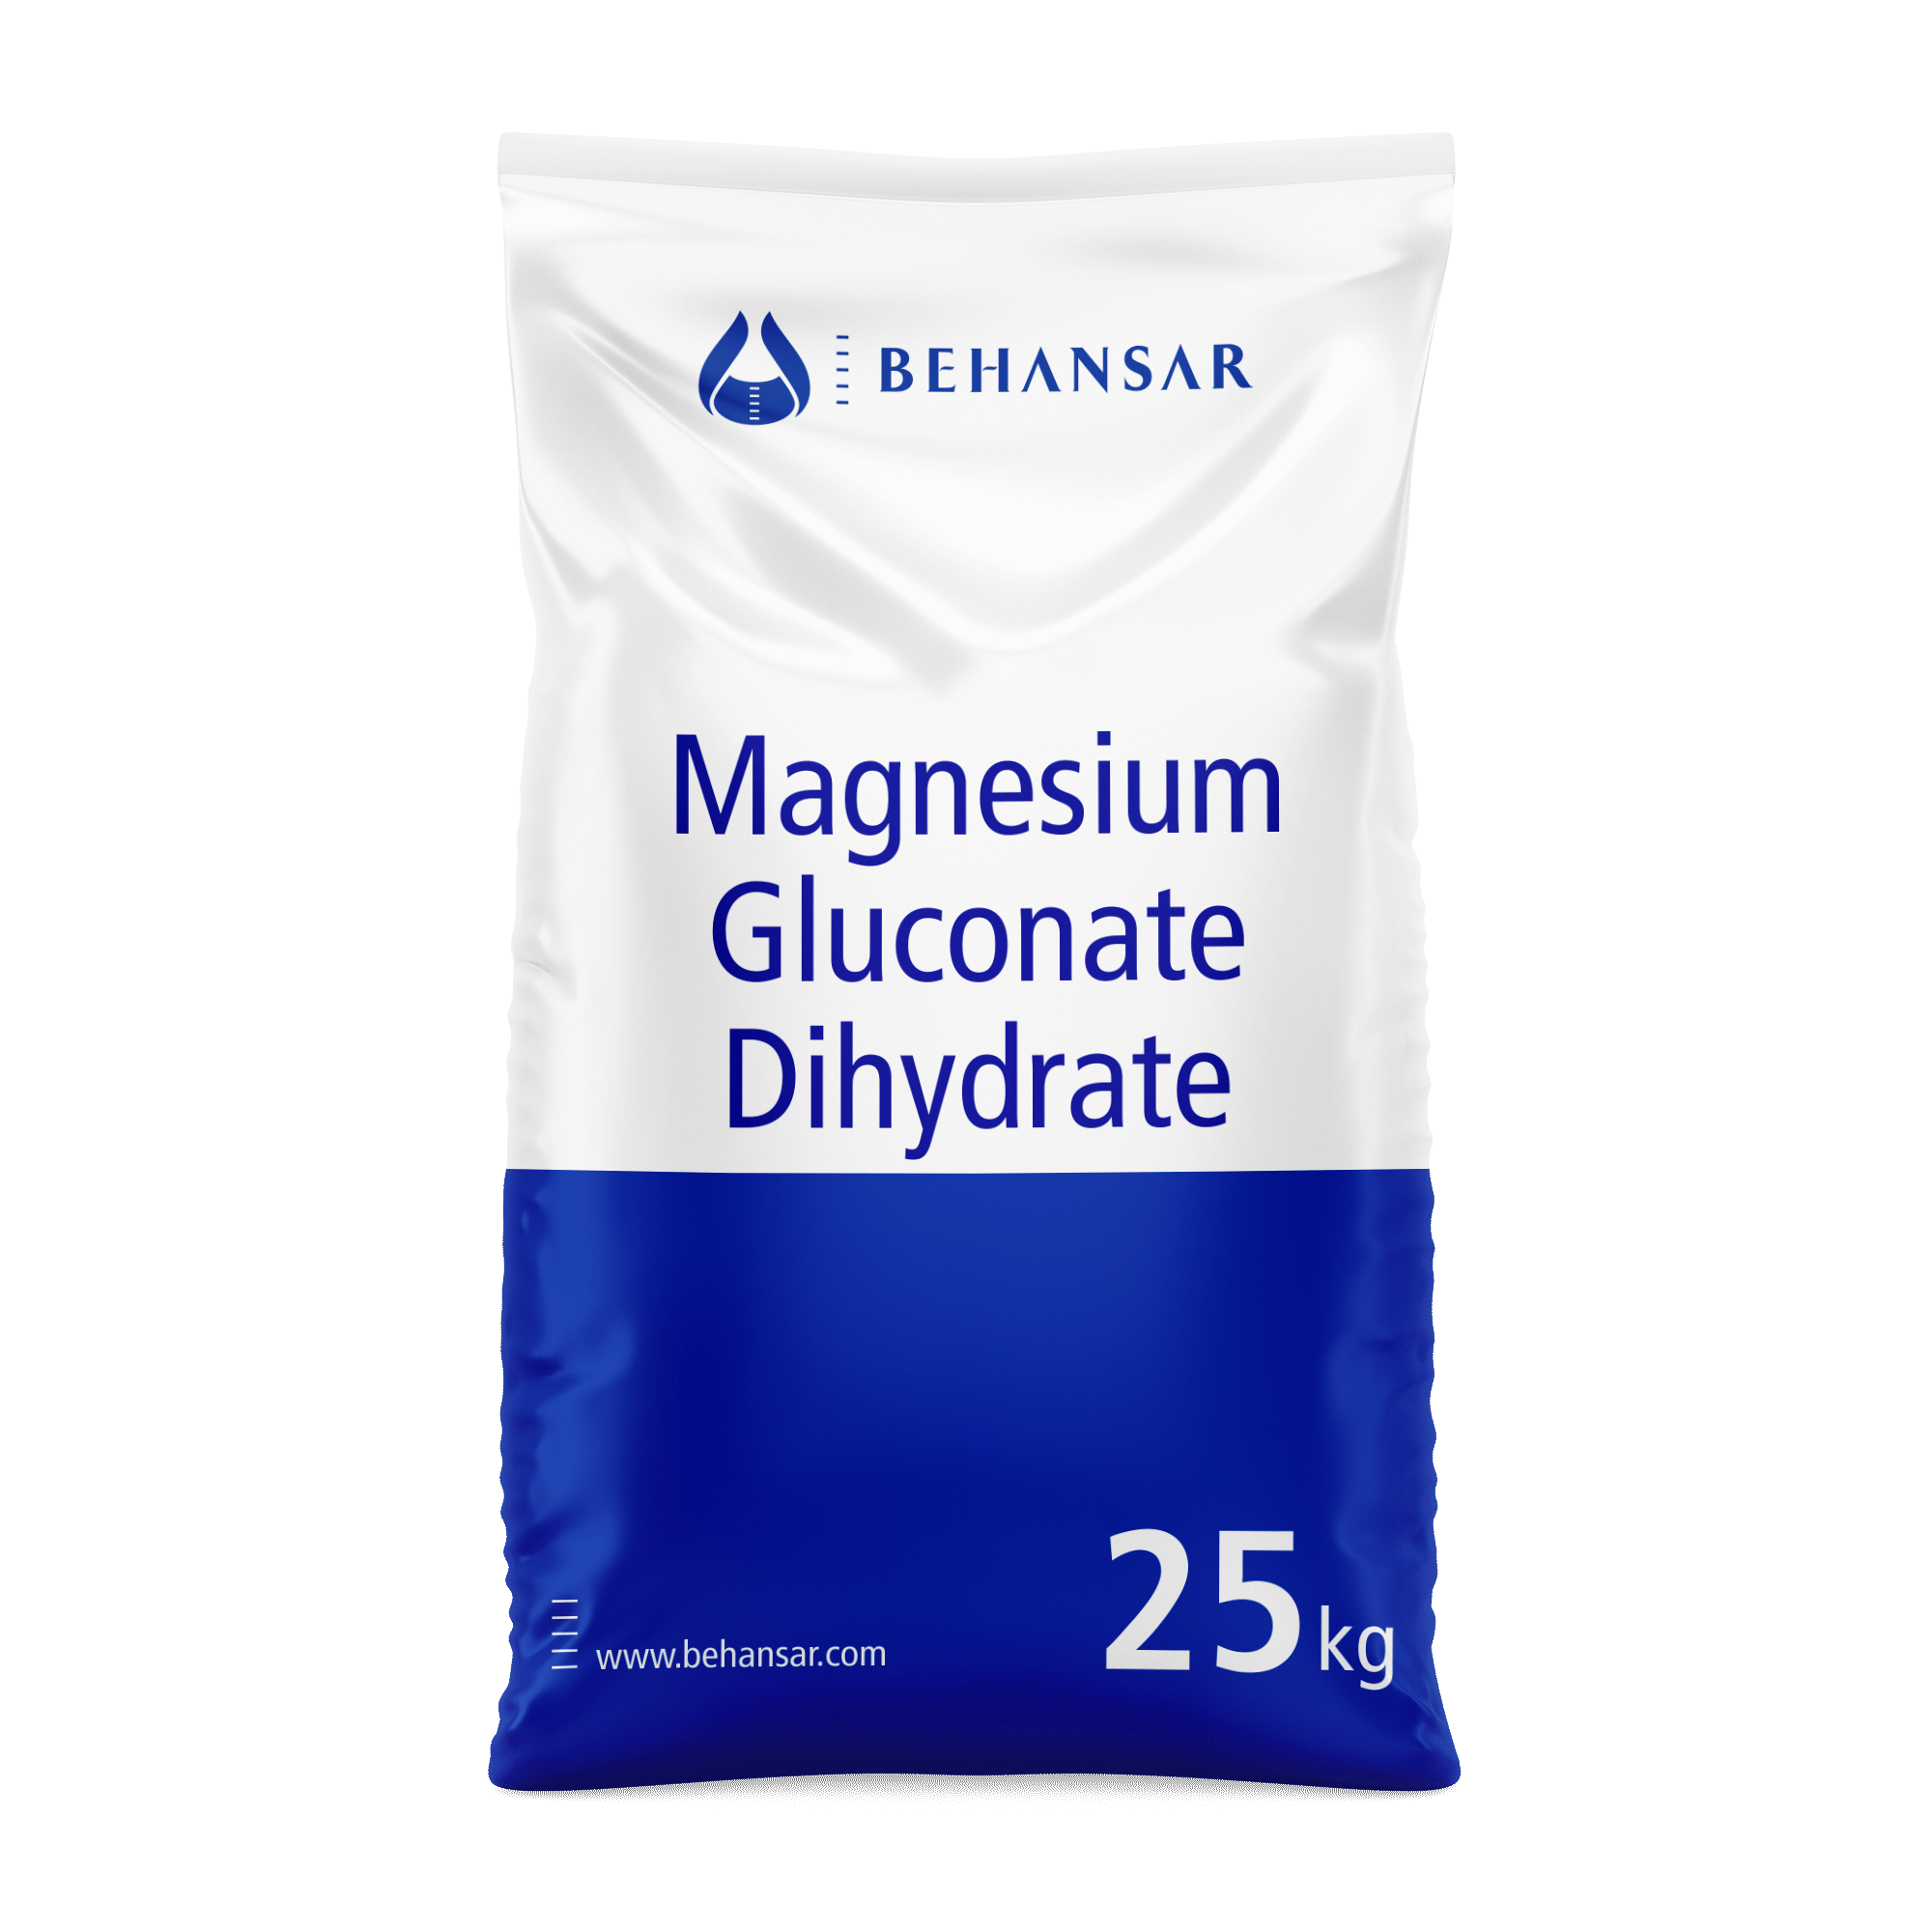 Magnesium Gluconate Dihydrate is one of the products of Behansar Co